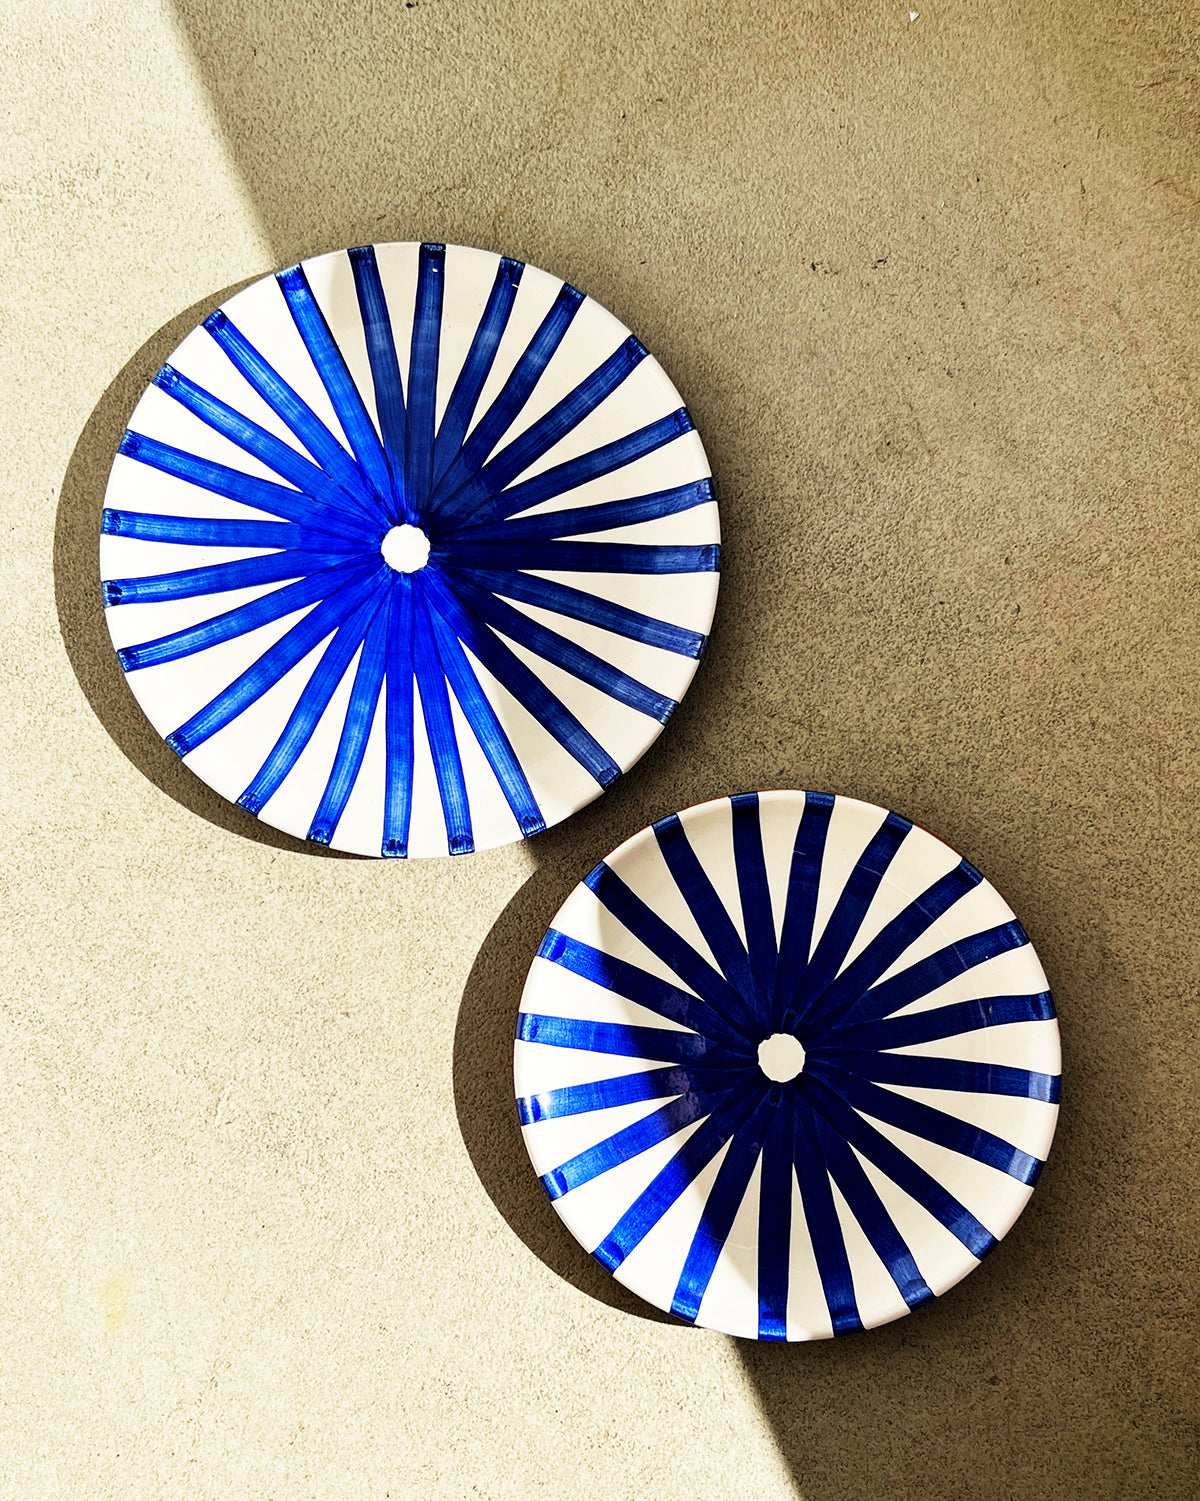 Casa Cubista Ray Pattern Plates in Blue